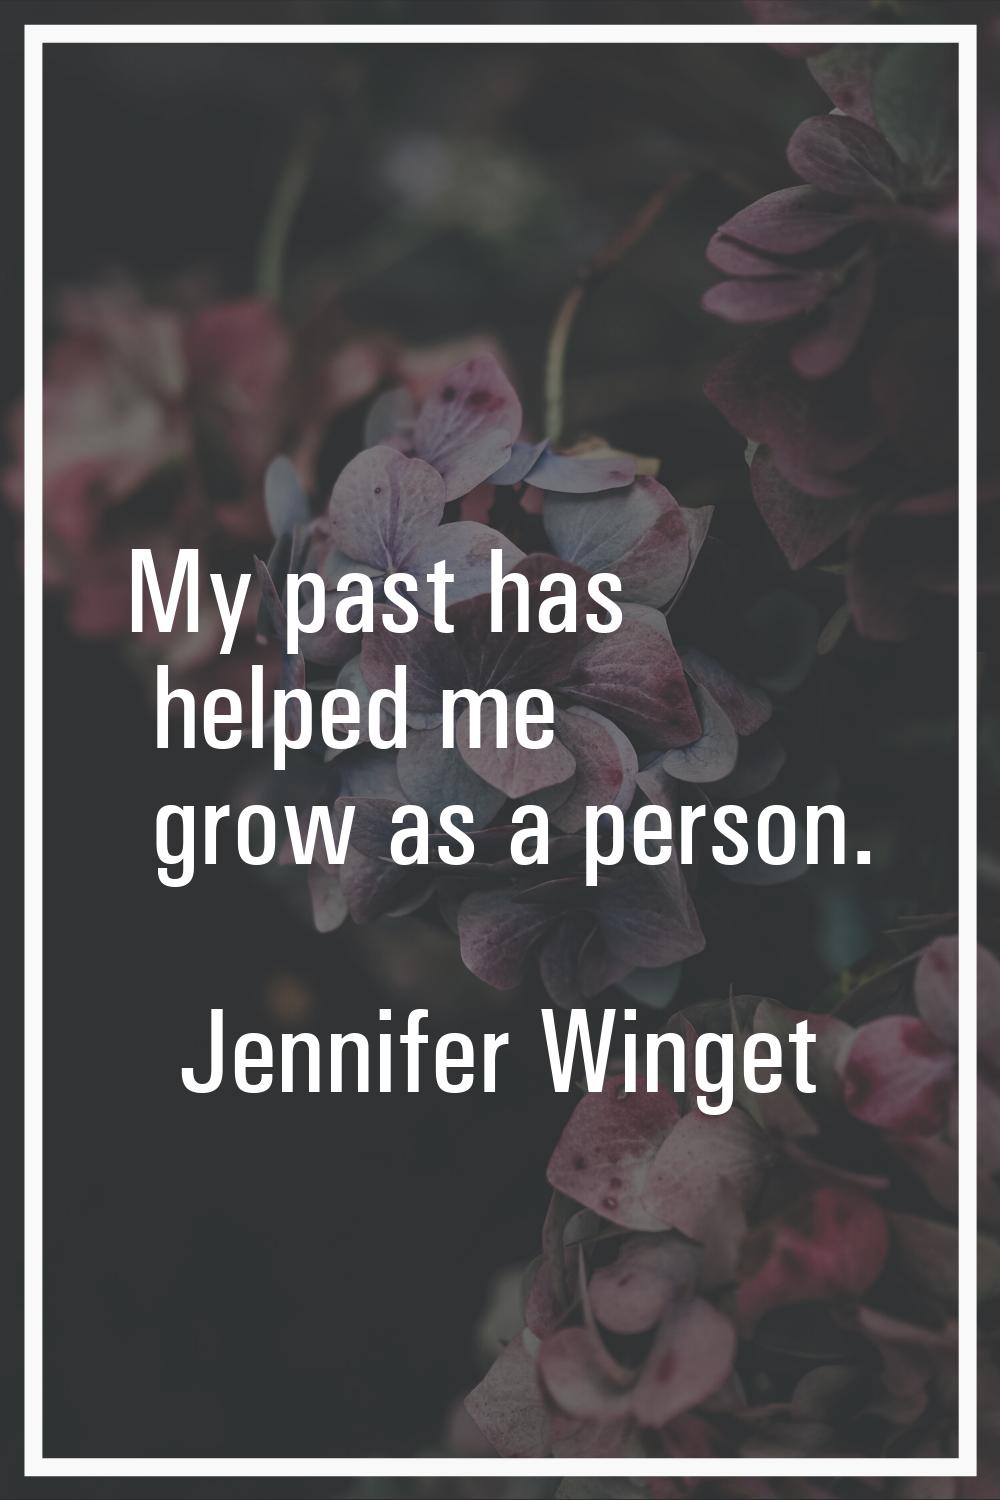 My past has helped me grow as a person.